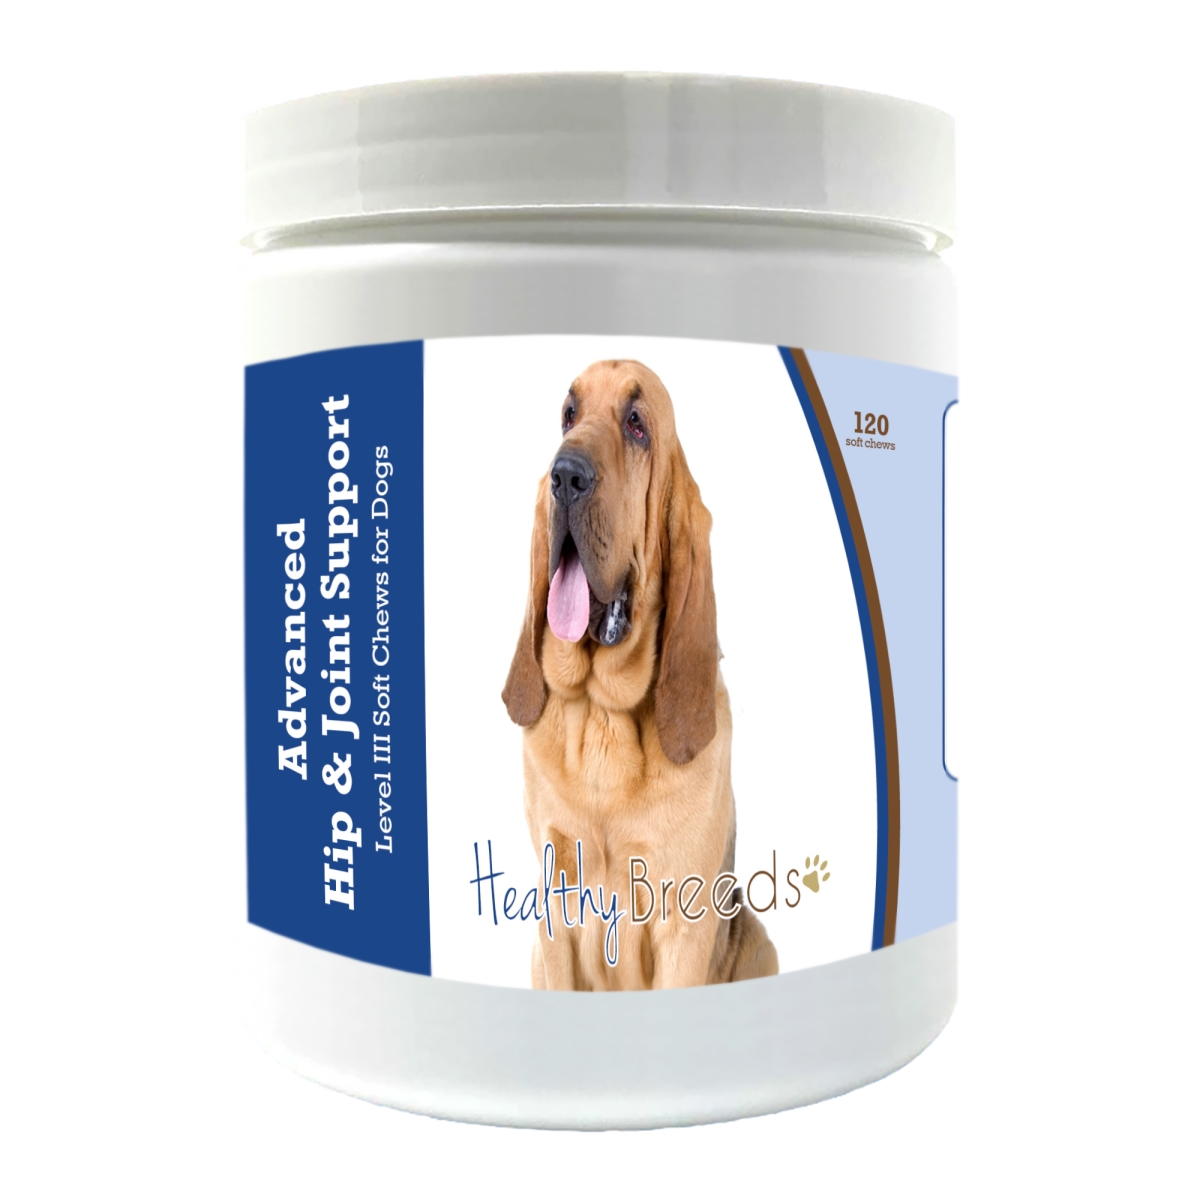 Picture of Healthy Breeds 192959897654 Bloodhound Advanced Hip & Joint Support Level III Soft Chews for Dogs